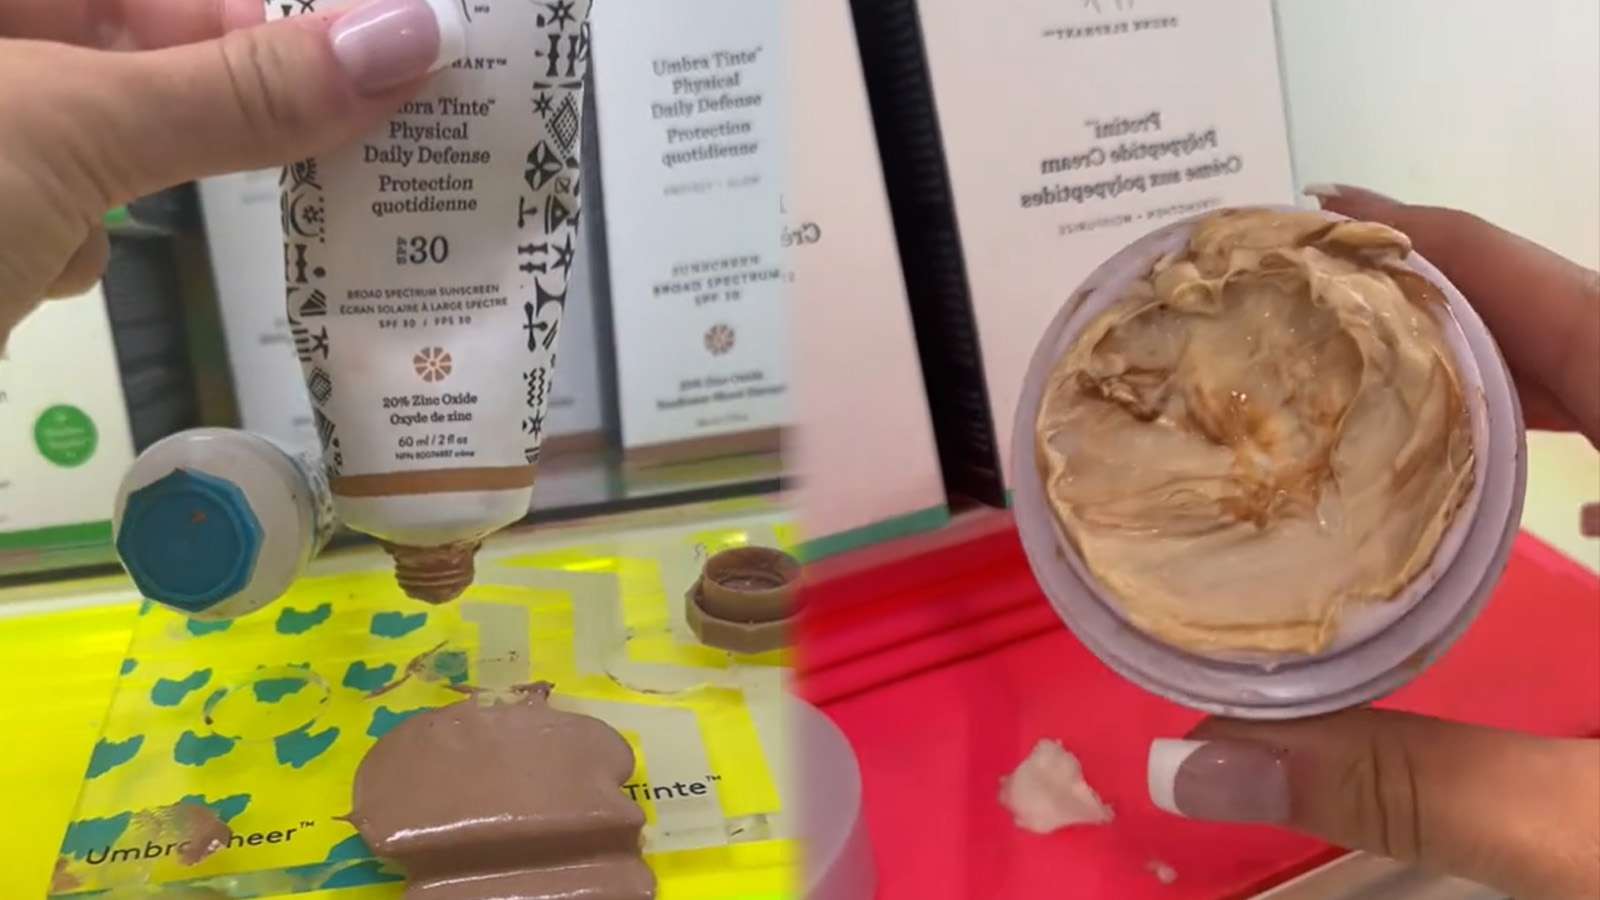 Ulta Beauty worker reveals state of testers and skincare “smoothies” might be to blame